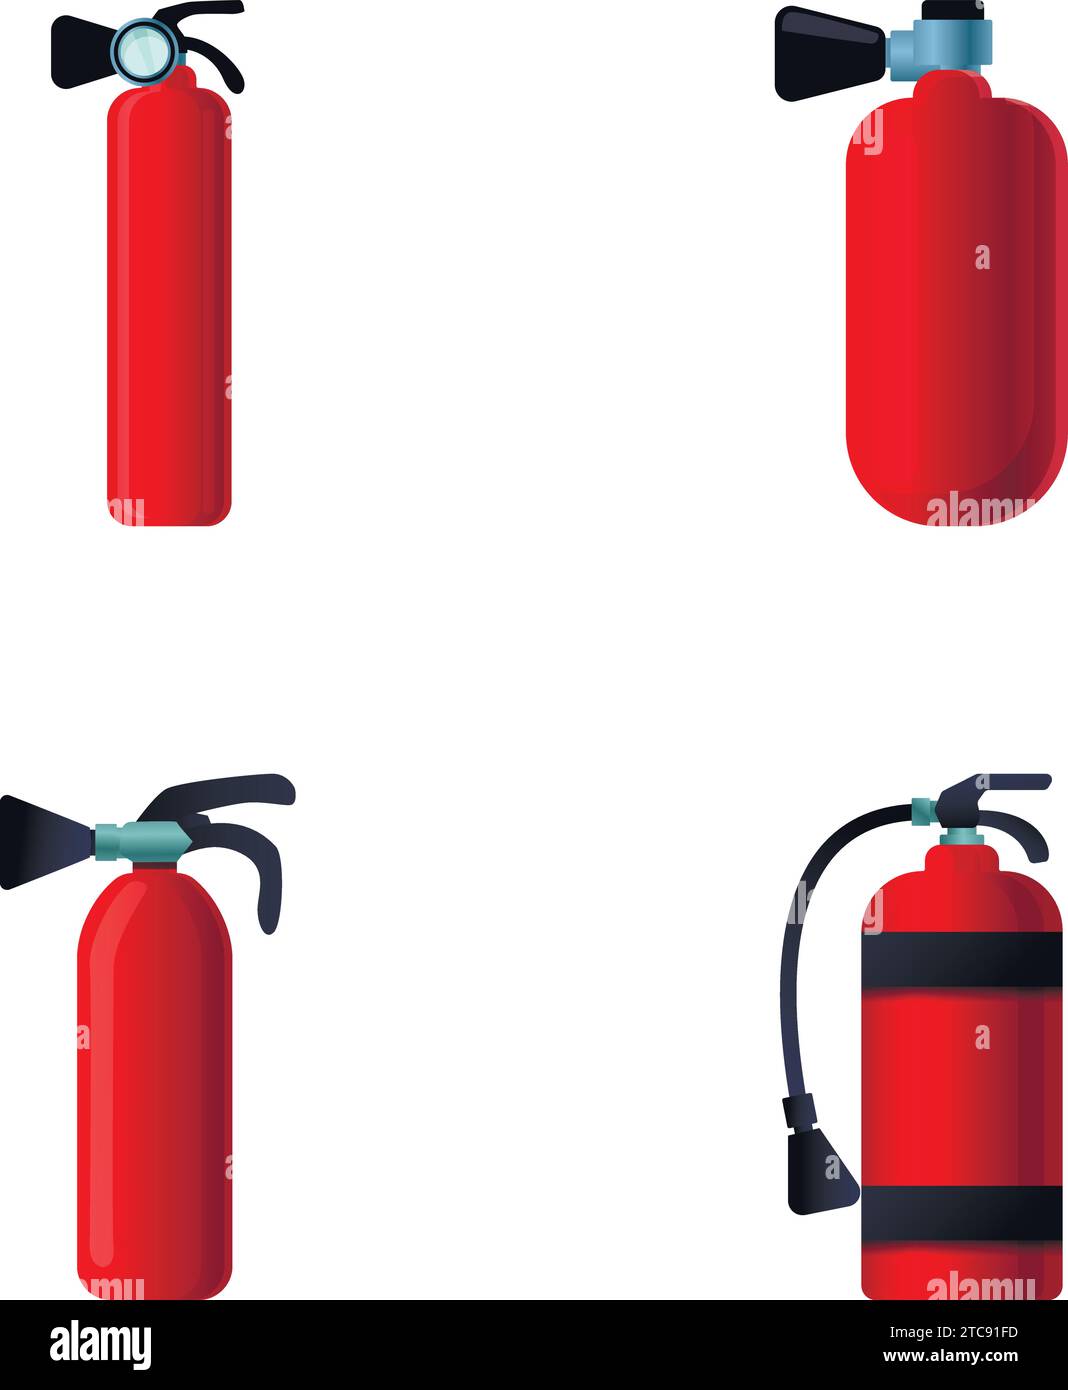 Extinguisher icons set cartoon vector. Various red fire extinguisher. Device designed to extinguish fire Stock Vector